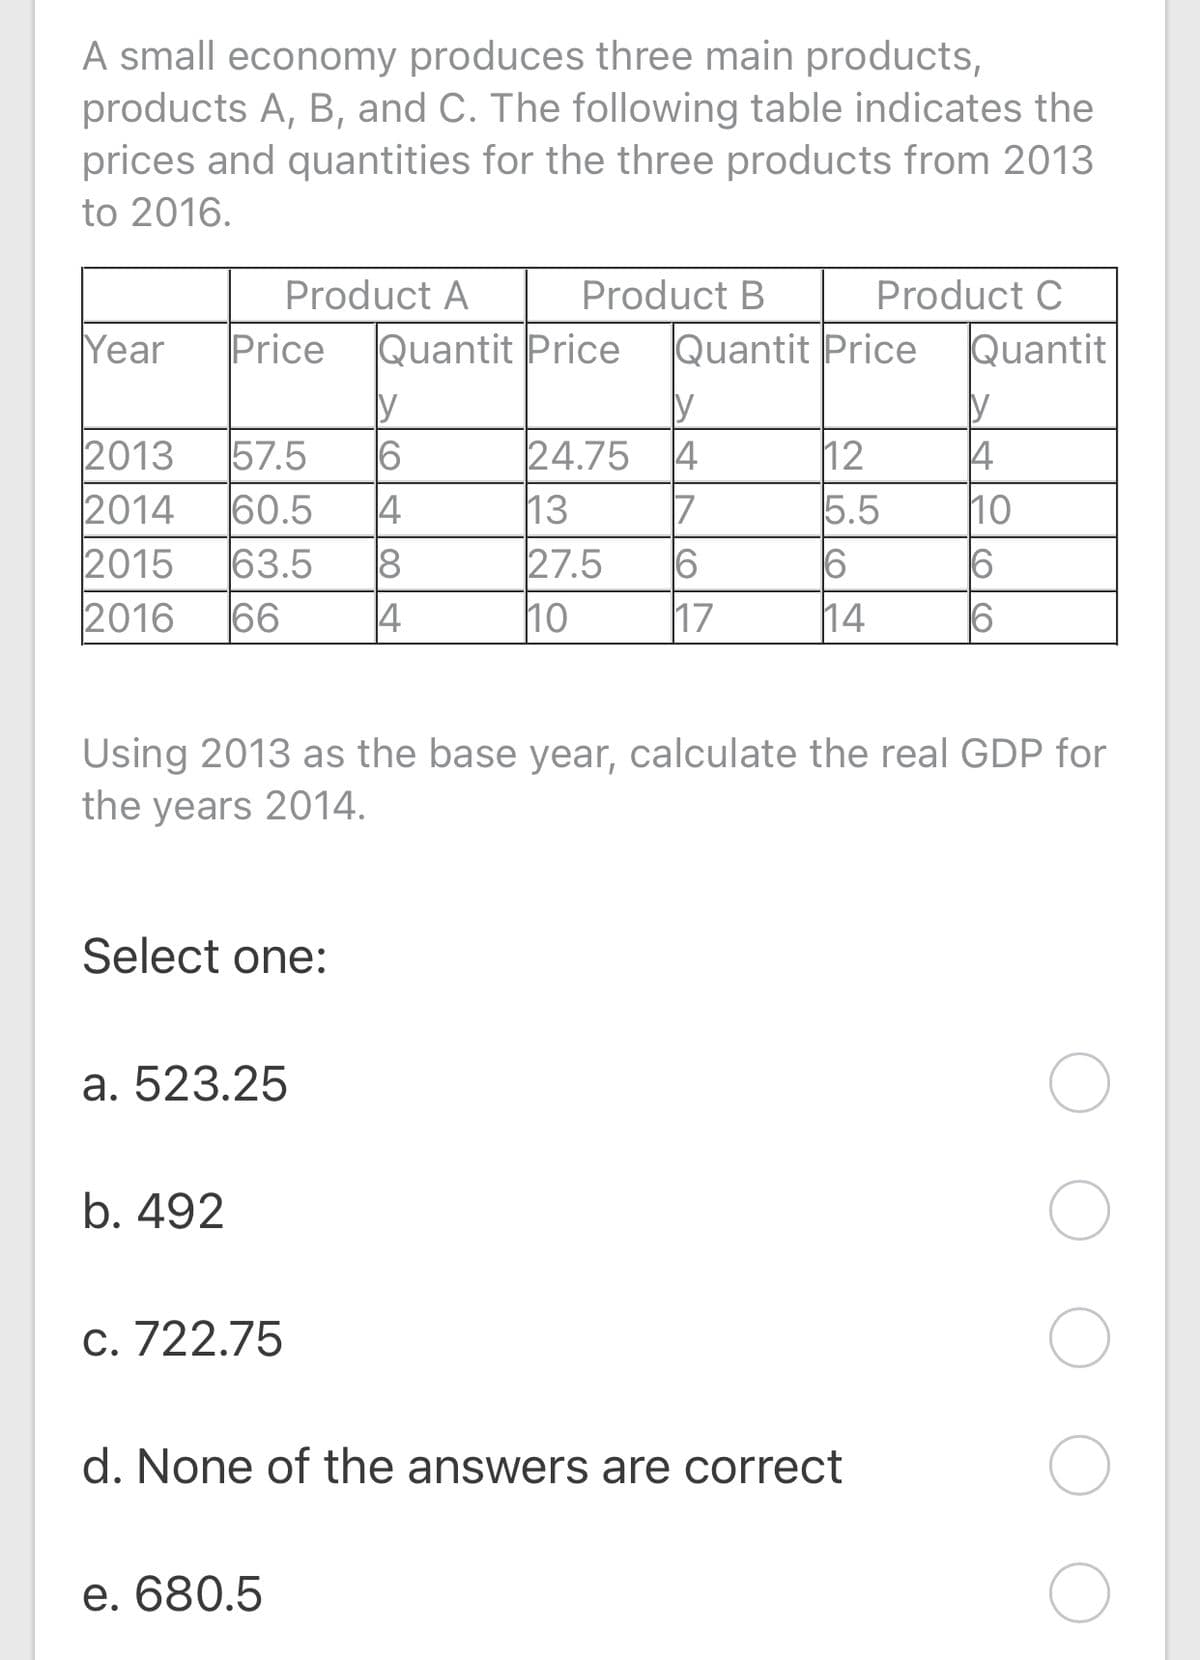 A small economy produces three main products,
products A, B, and C. The following table indicates the
prices and quantities for the three products from 2013
to 2016.
Product A
Product B
Product C
Year
Price
Quantit Price
Quantit Price
Quantit
2013
24.75
17
13
6
27.5
10
12
5.5
6
57.5
4
6
14
14
10
2014
2015
2016
60.5
63.5
66
18
14
17
14
Using 2013 as the base year, calculate the real GDP for
the years 2014.
Select one:
а. 523.25
b. 492
С. 722.75
d. None of the answers are correct
e. 680.5
O CO
